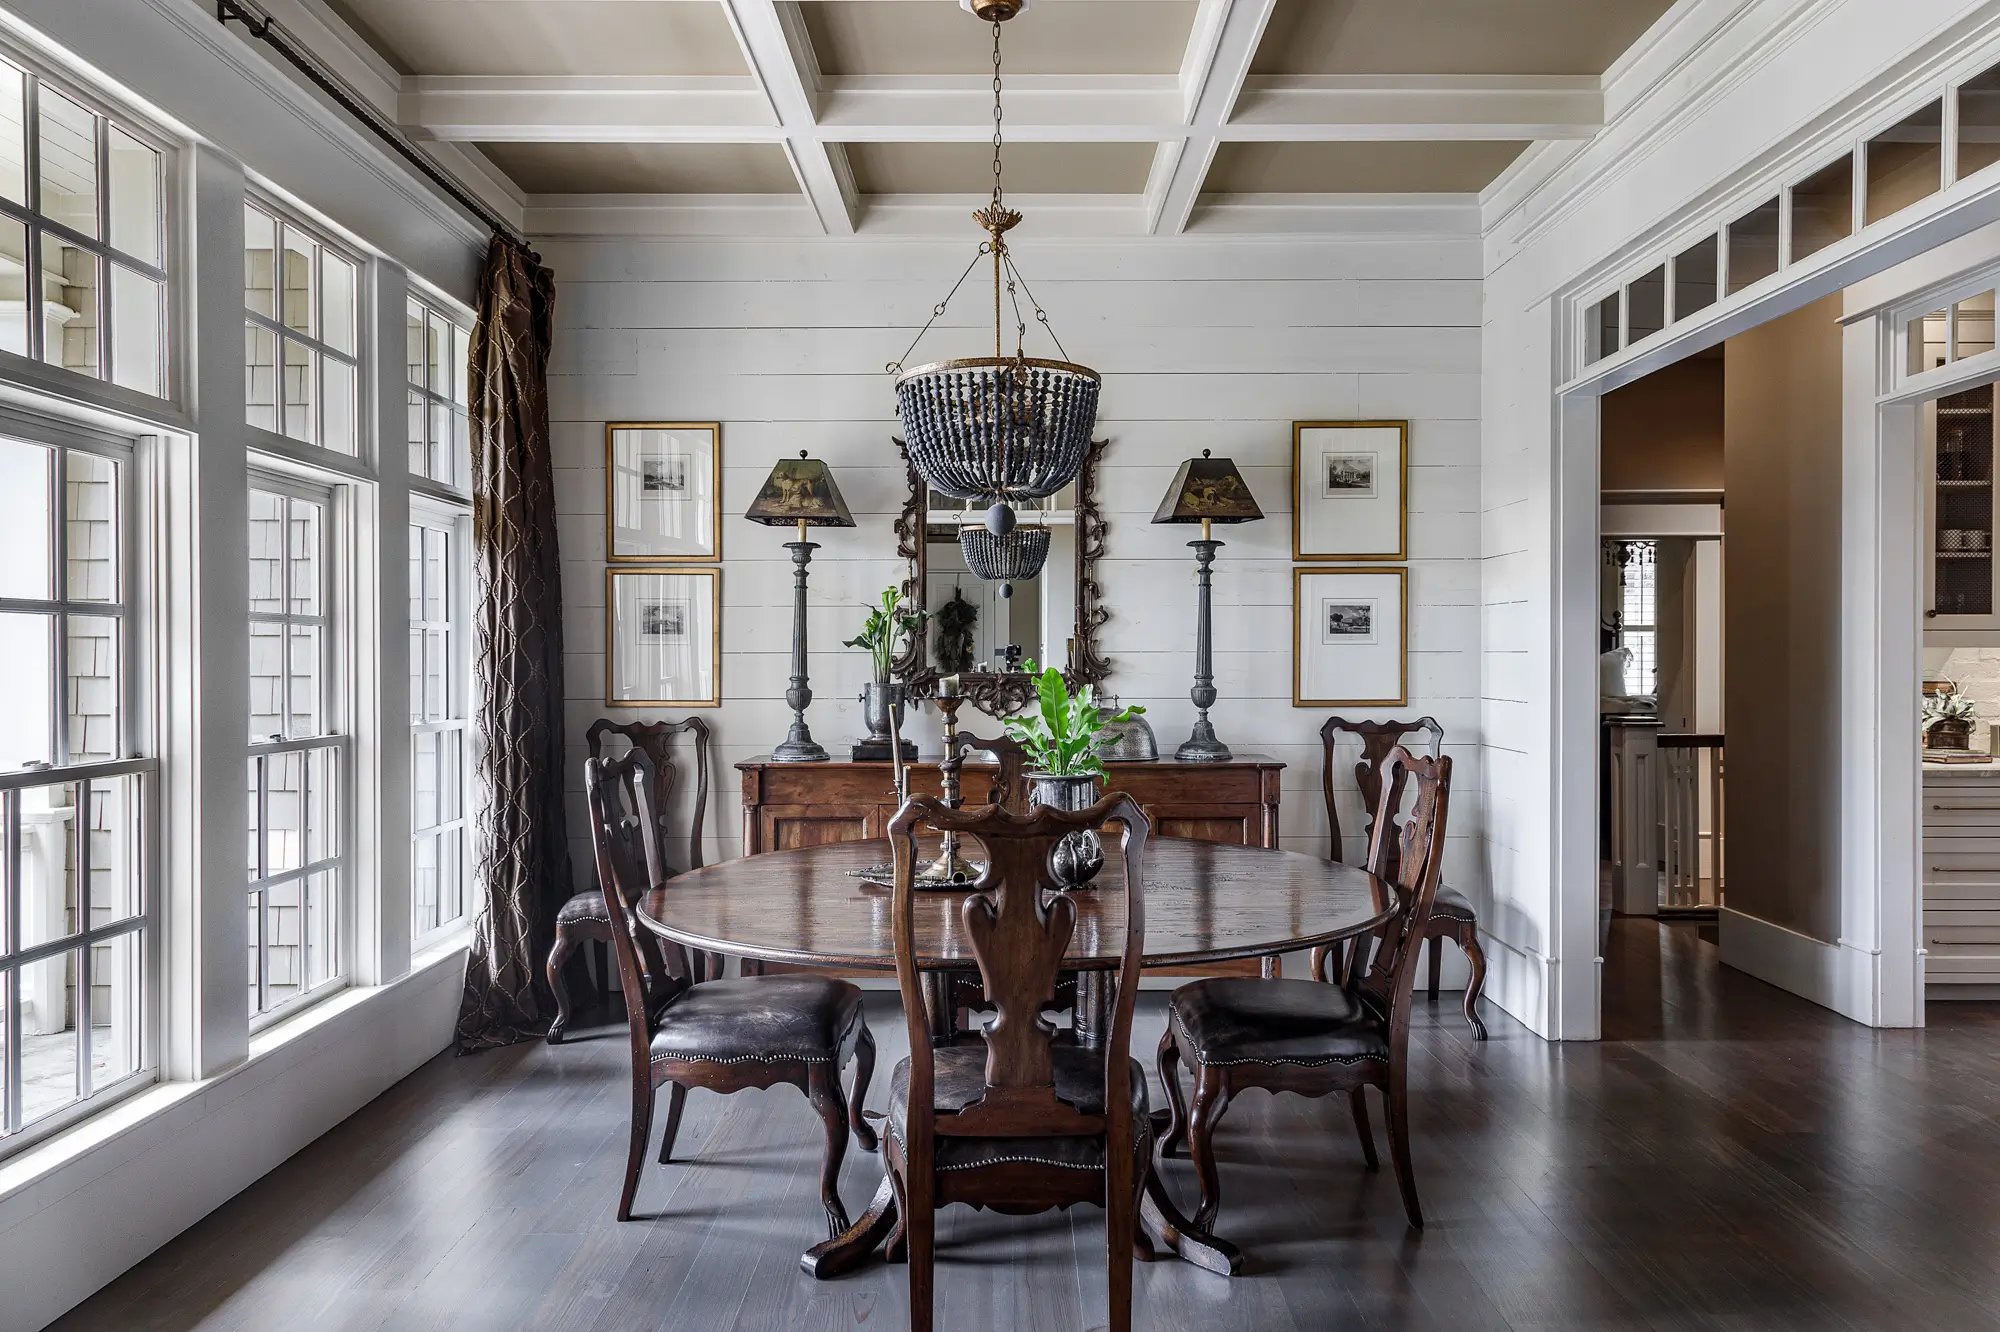 Elegant dining room with classic wooden table and chairs, sophisticated sideboard, and unique chandelier lighting